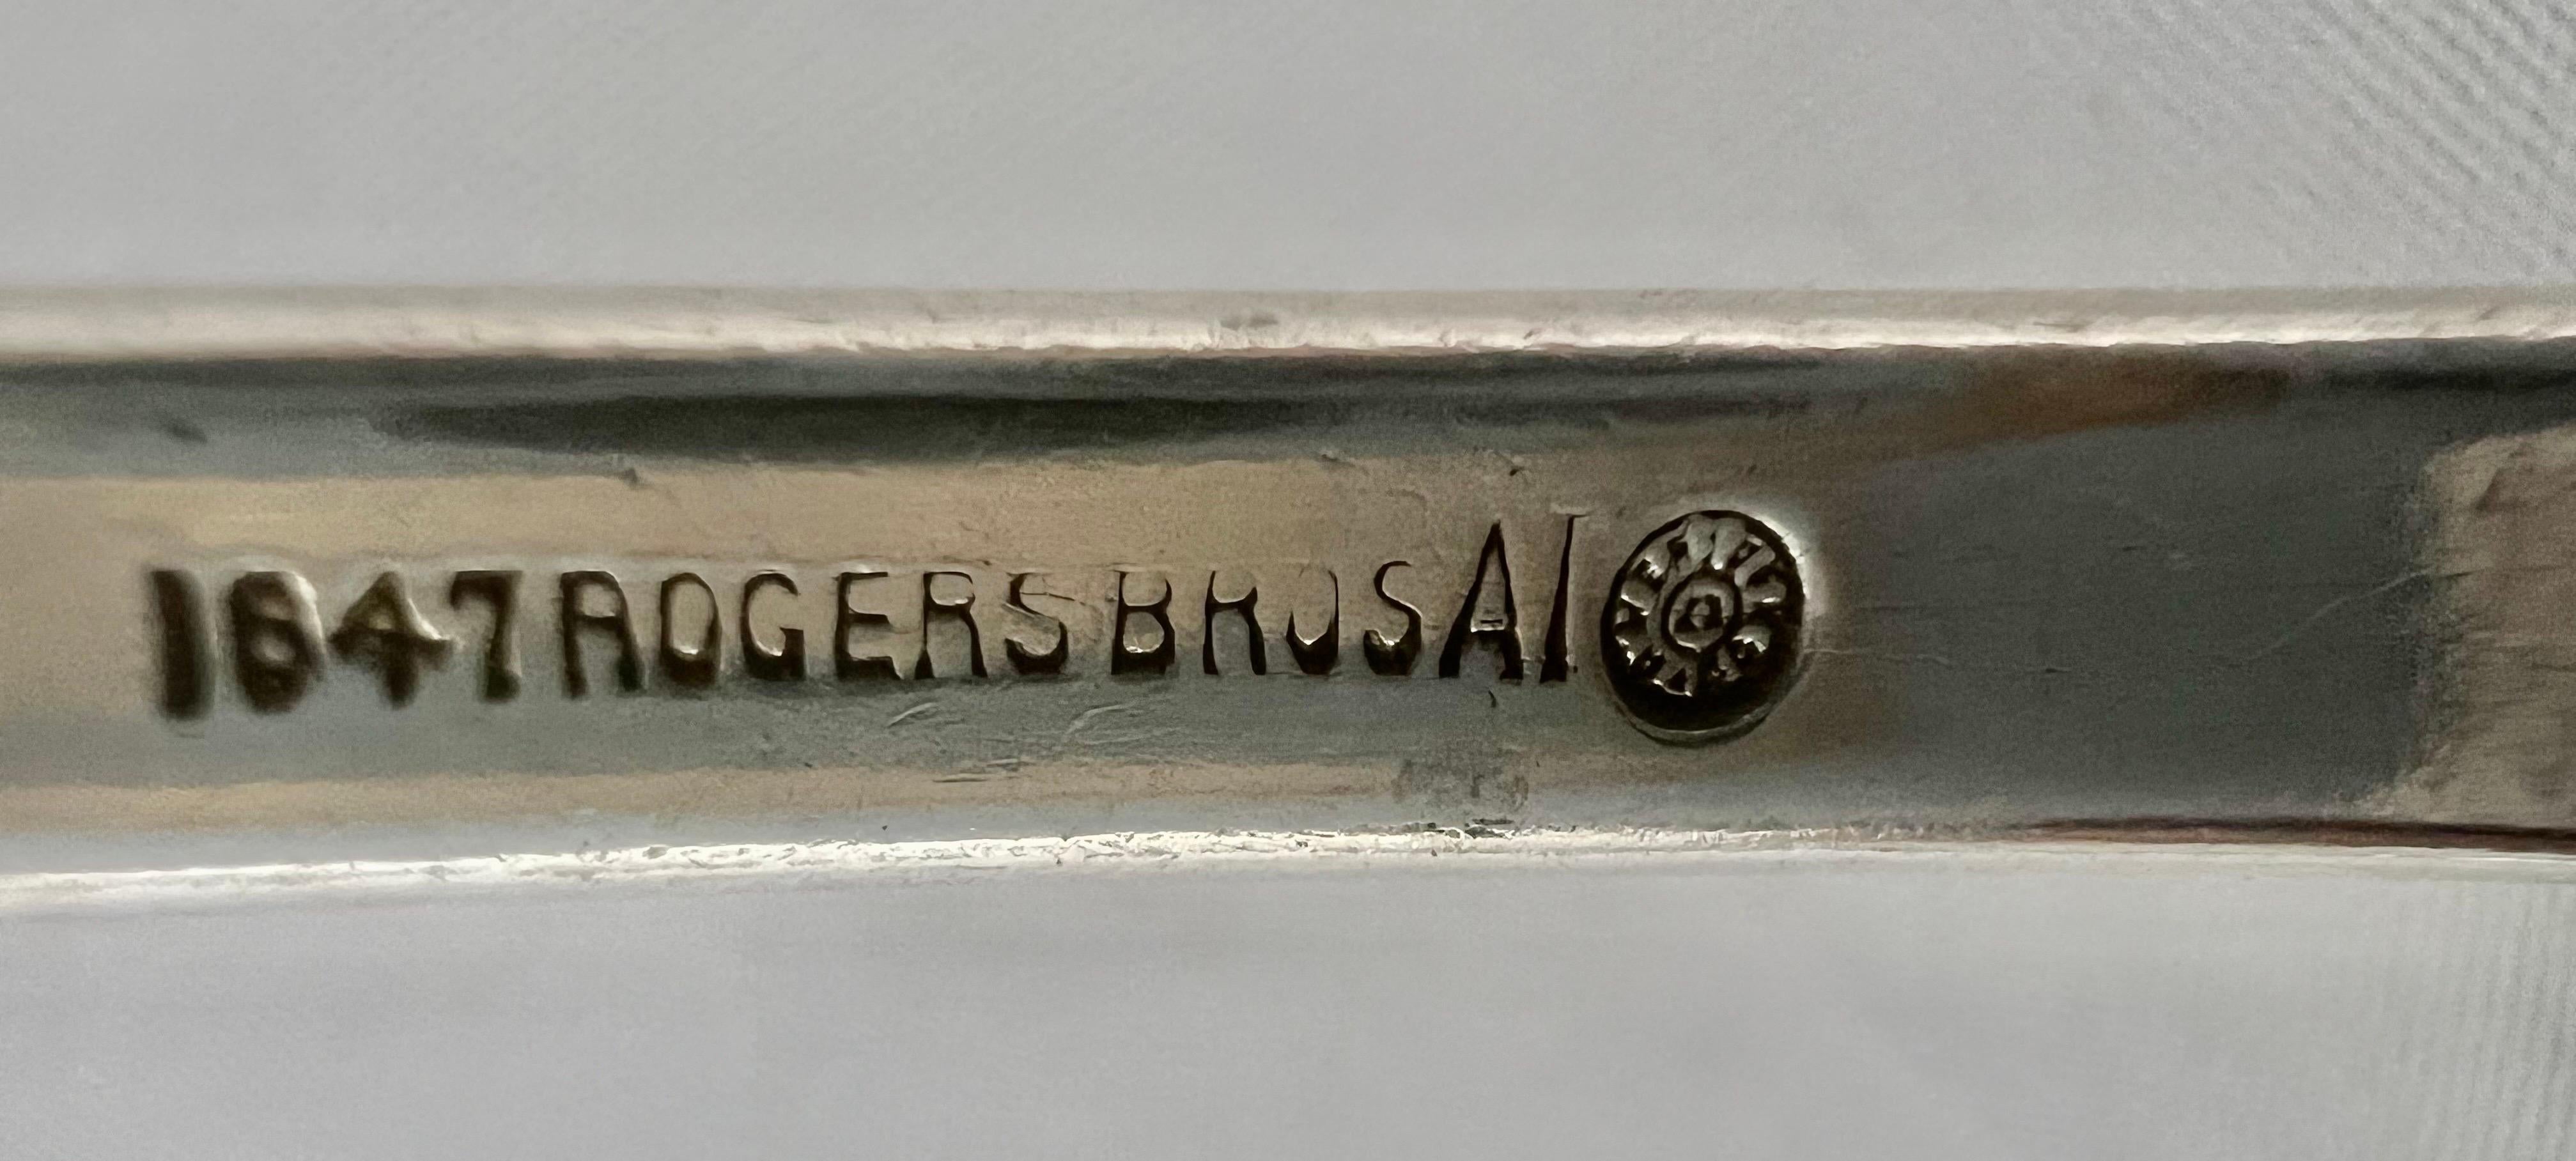 1847 rogers bros a1 spoon value